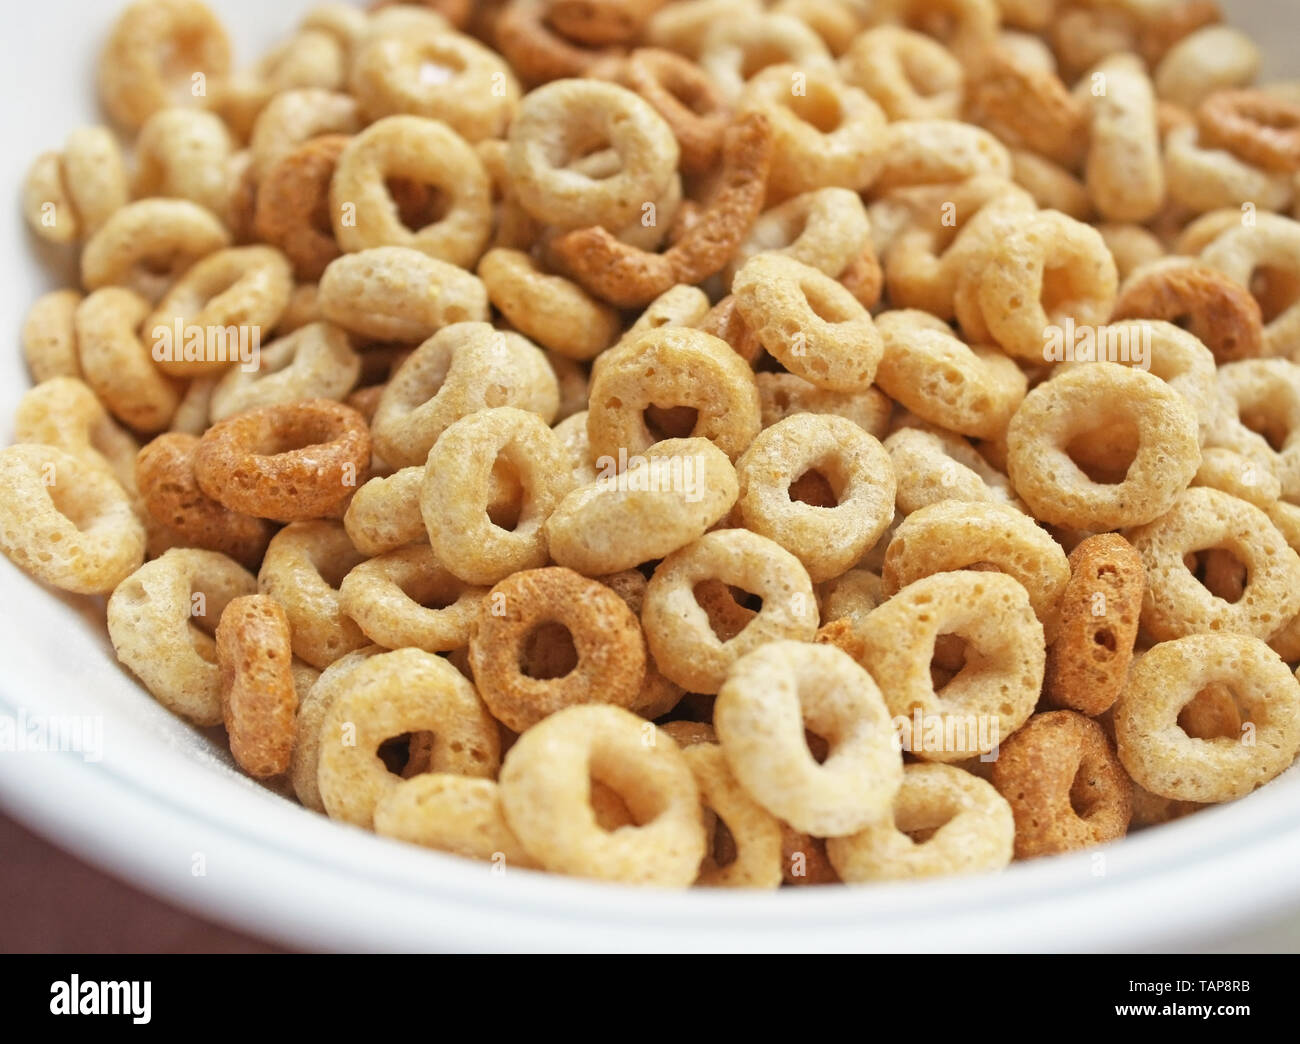 Bowl of multigrain cereal with no milk Stock Photo